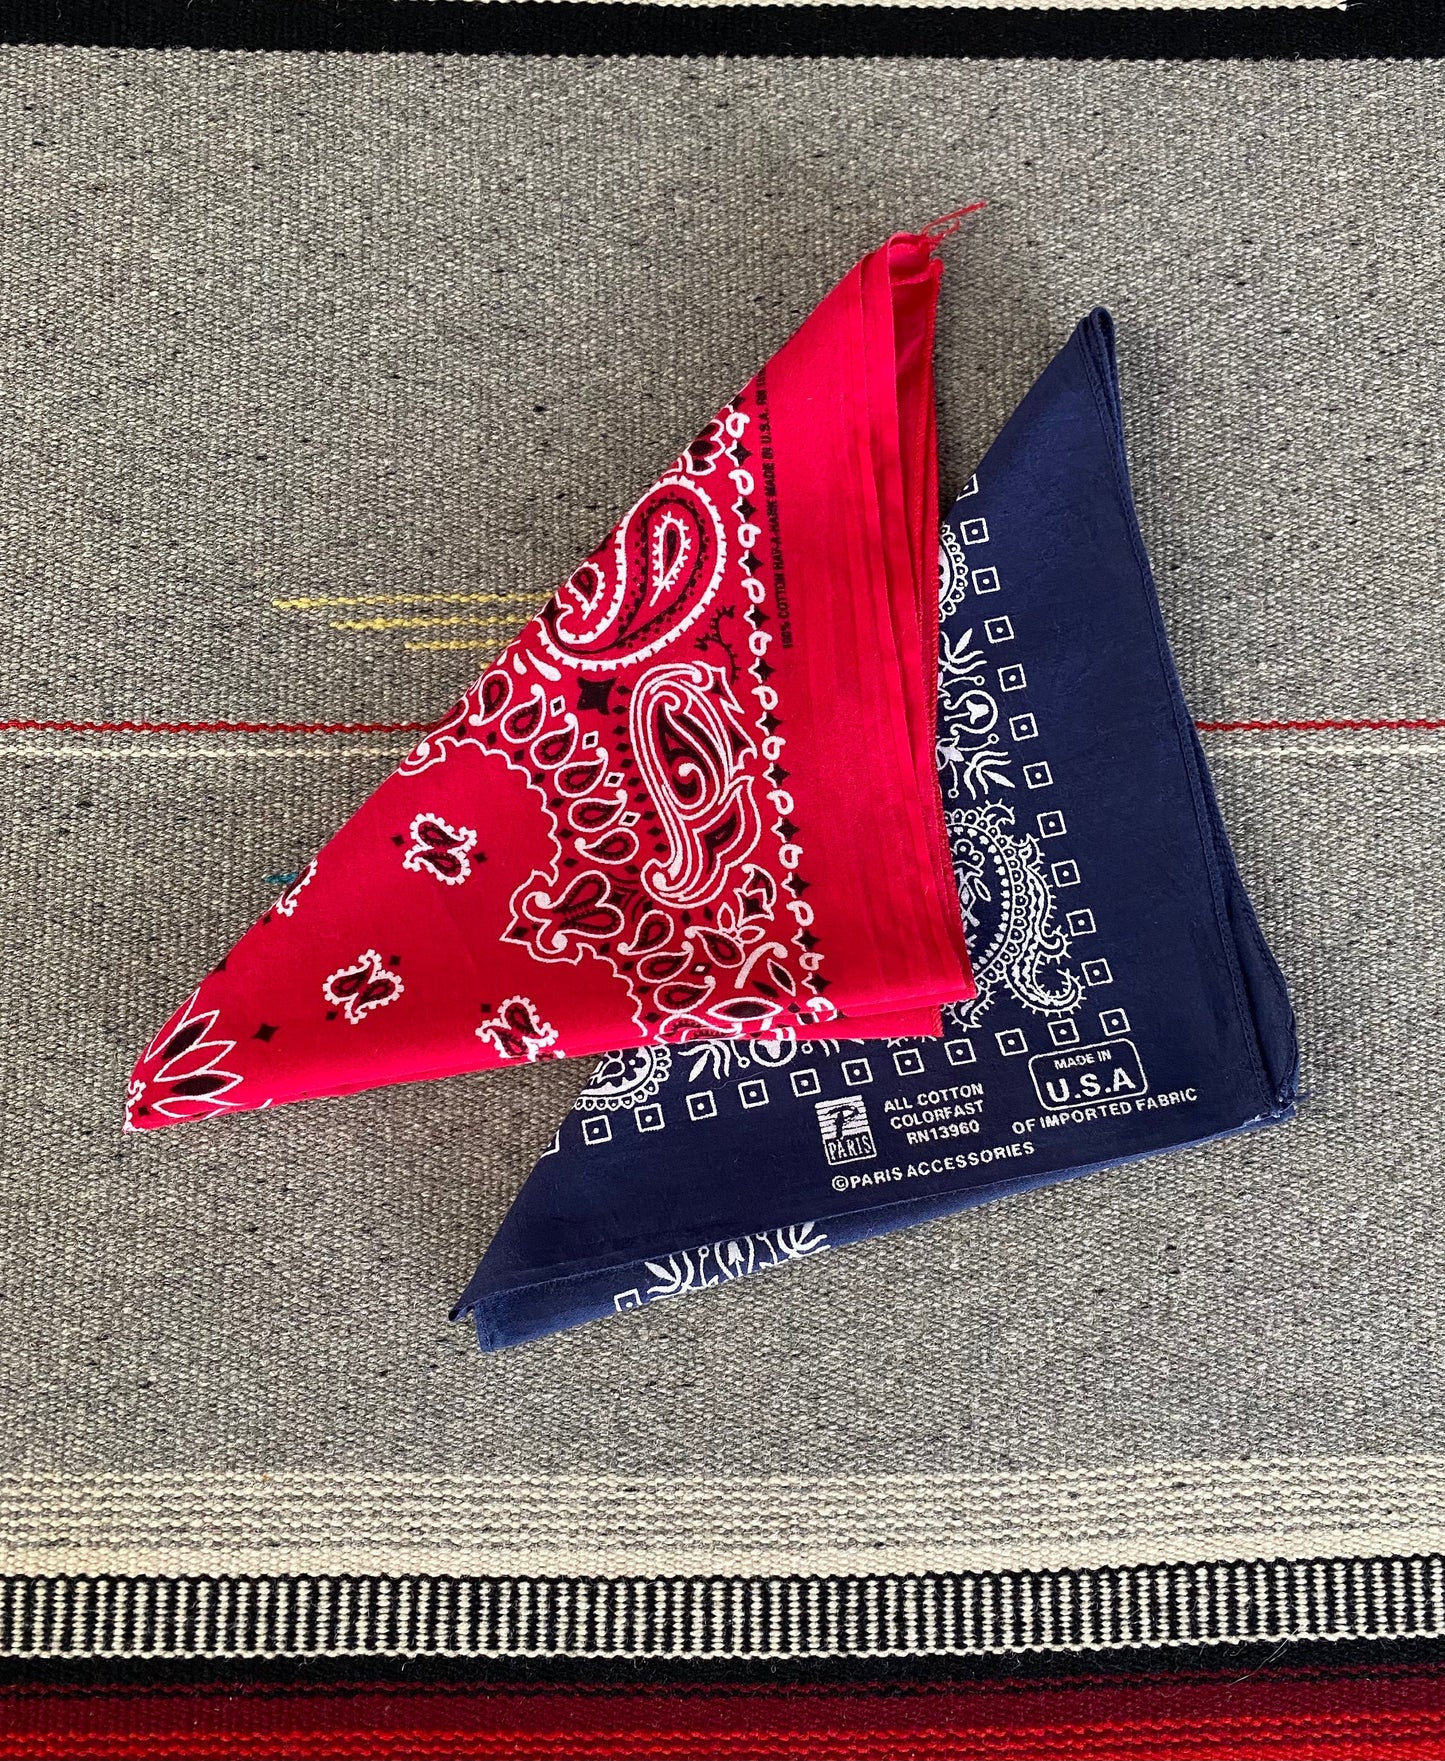 2 Vintage Bandanas Made in USA. One Red, one Bleu.